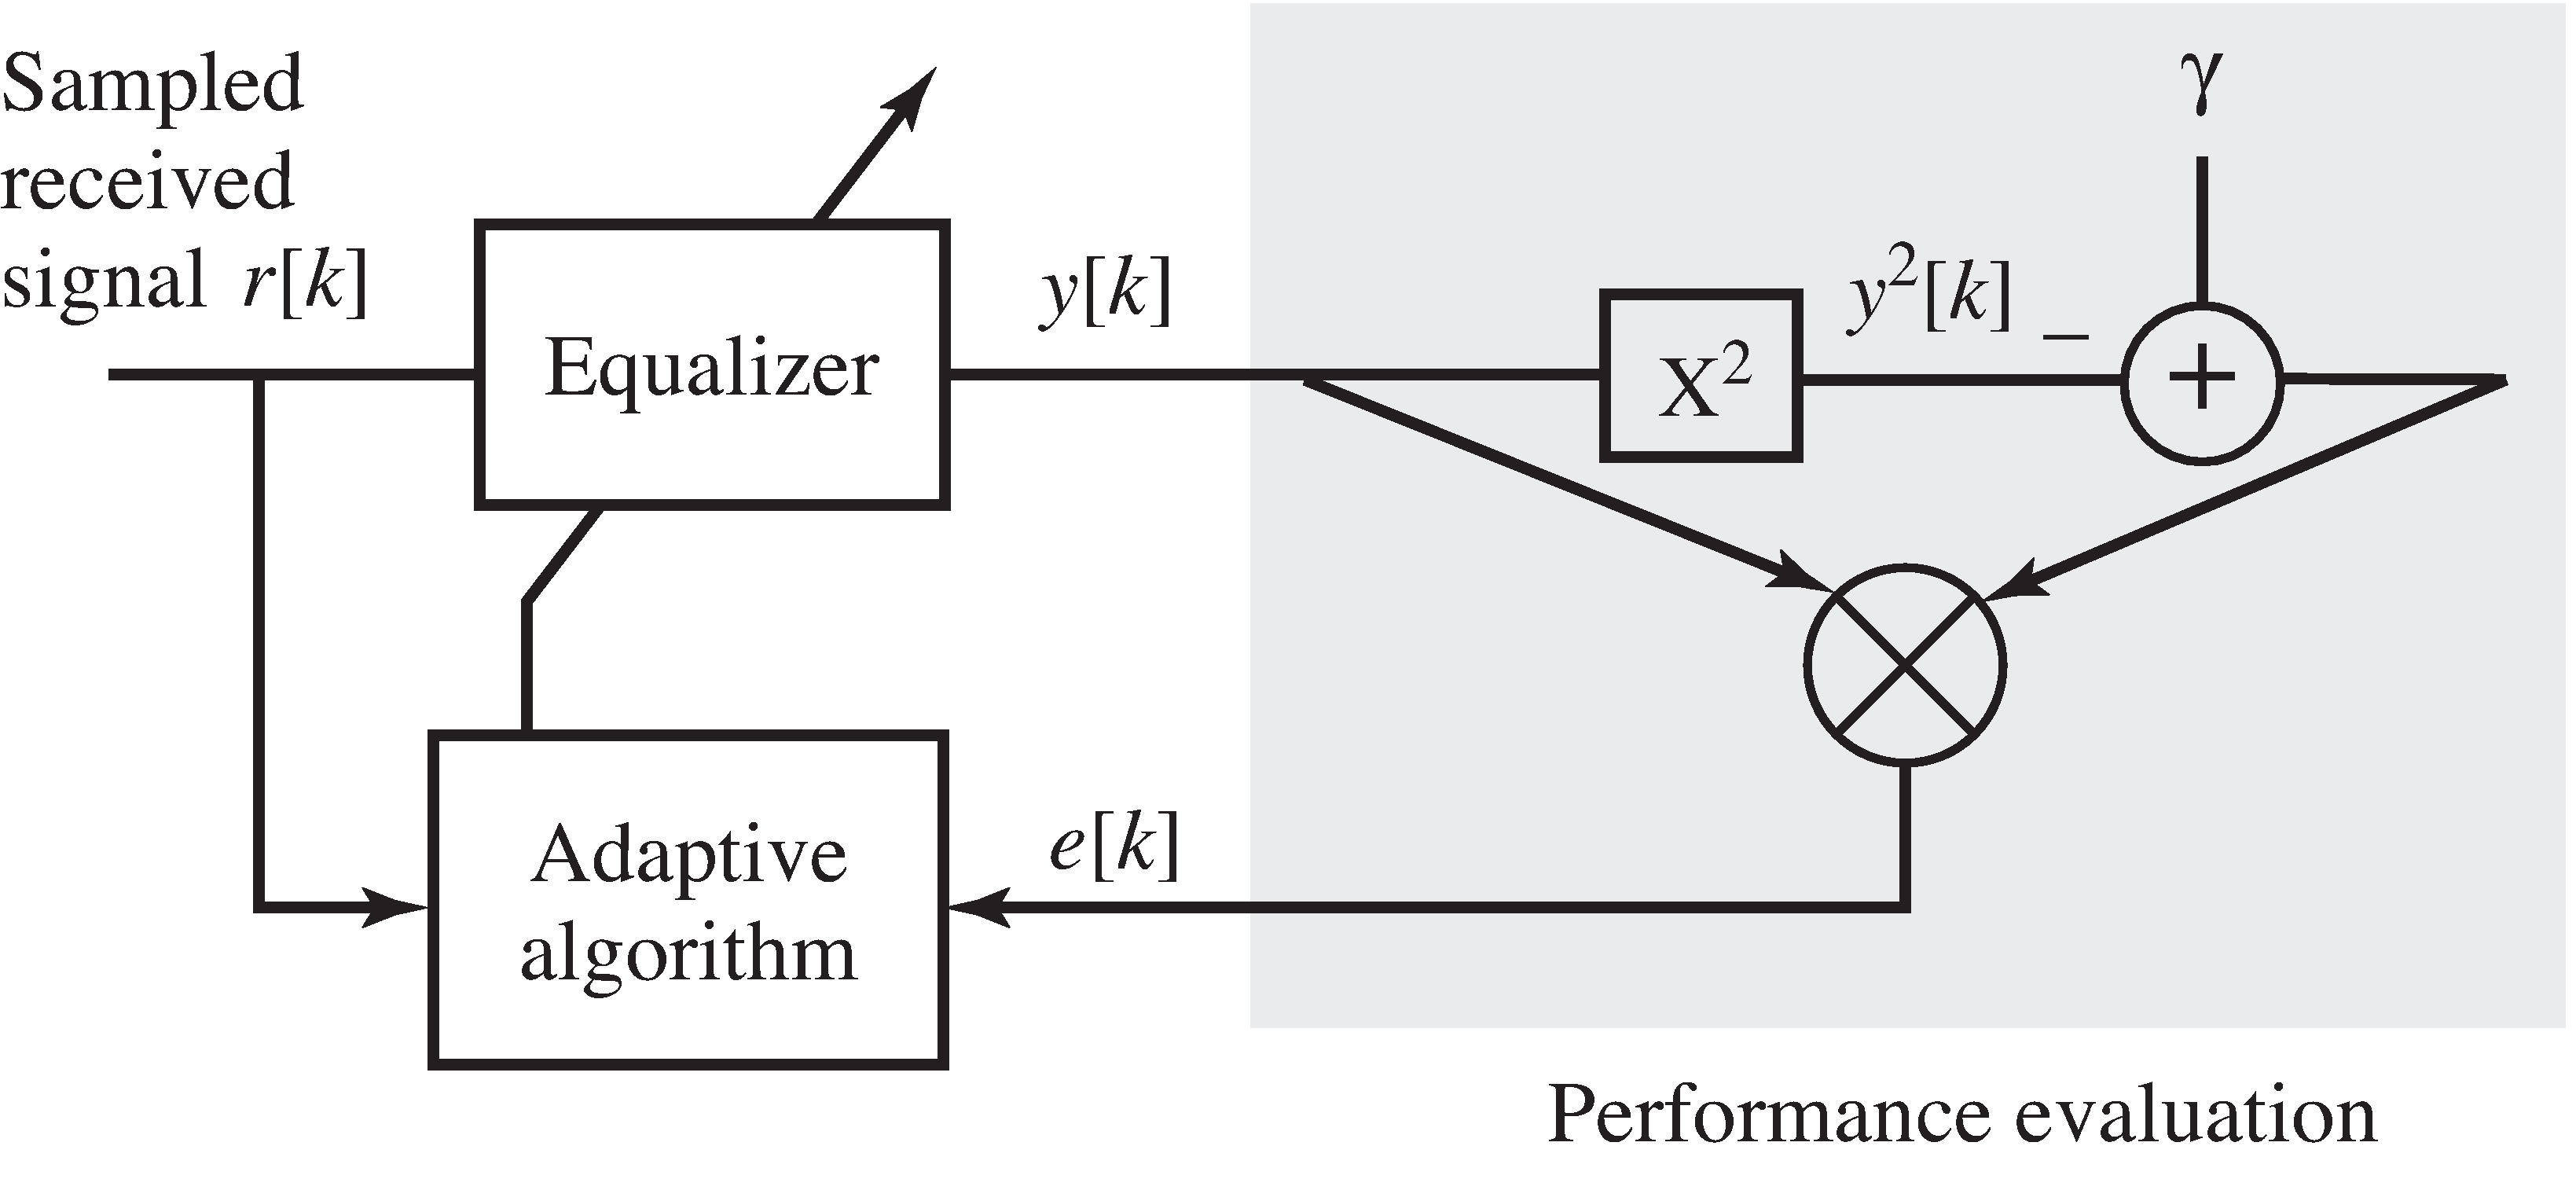 A dispersion-minimizing adaptive linear equalizer for binary data uses the difference between the square of the received signal and one to drive the adaptation of the coefficients of the equalizer.